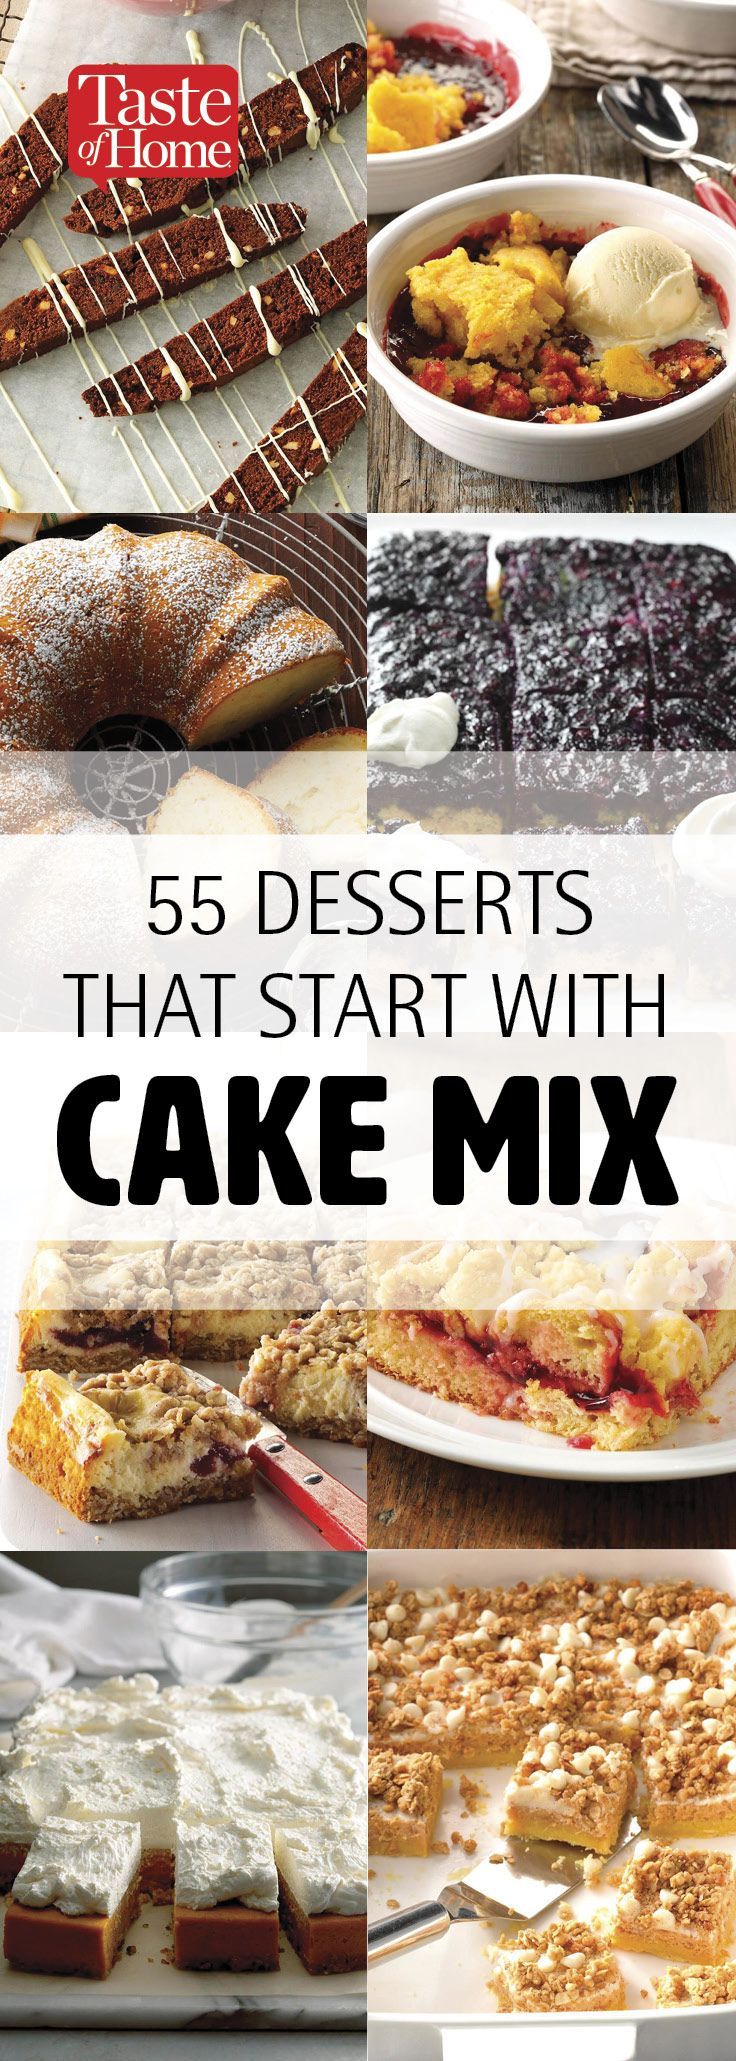 55 Things to Do With a Box of Cake Mix -   12 cake Mix desserts ideas